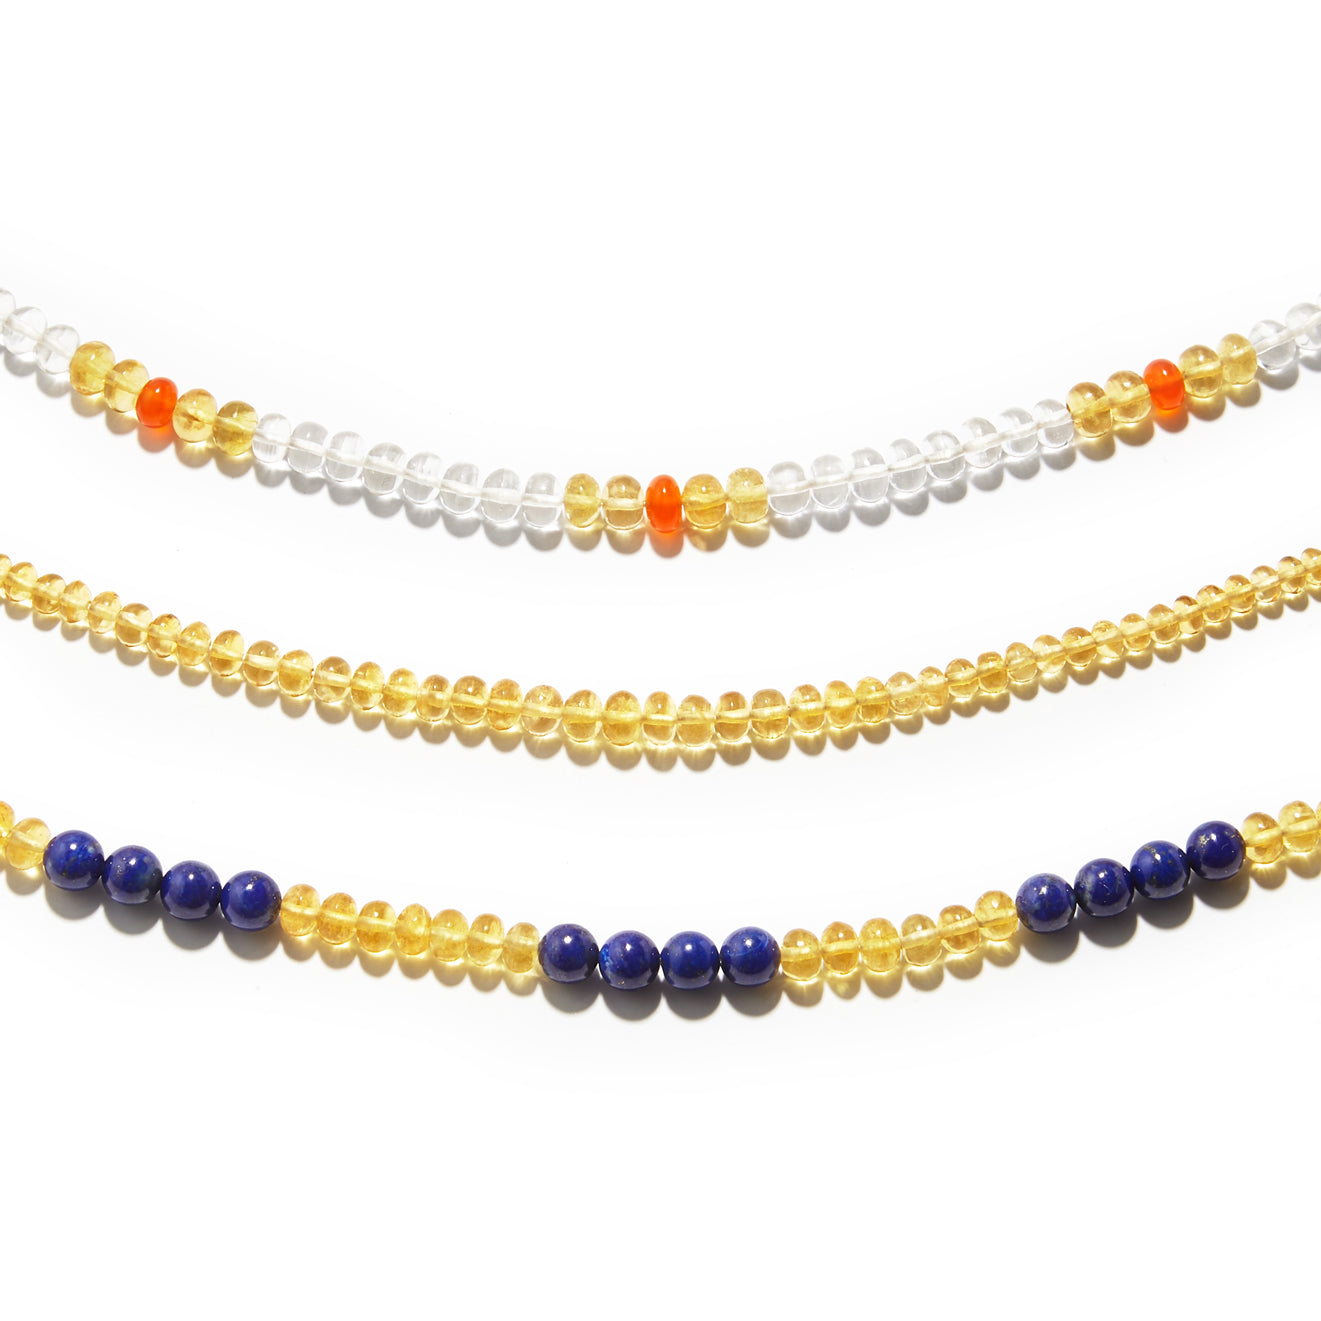 Set of three crystal healing necklaces with Golden Beryl known for gaining mastery in your life